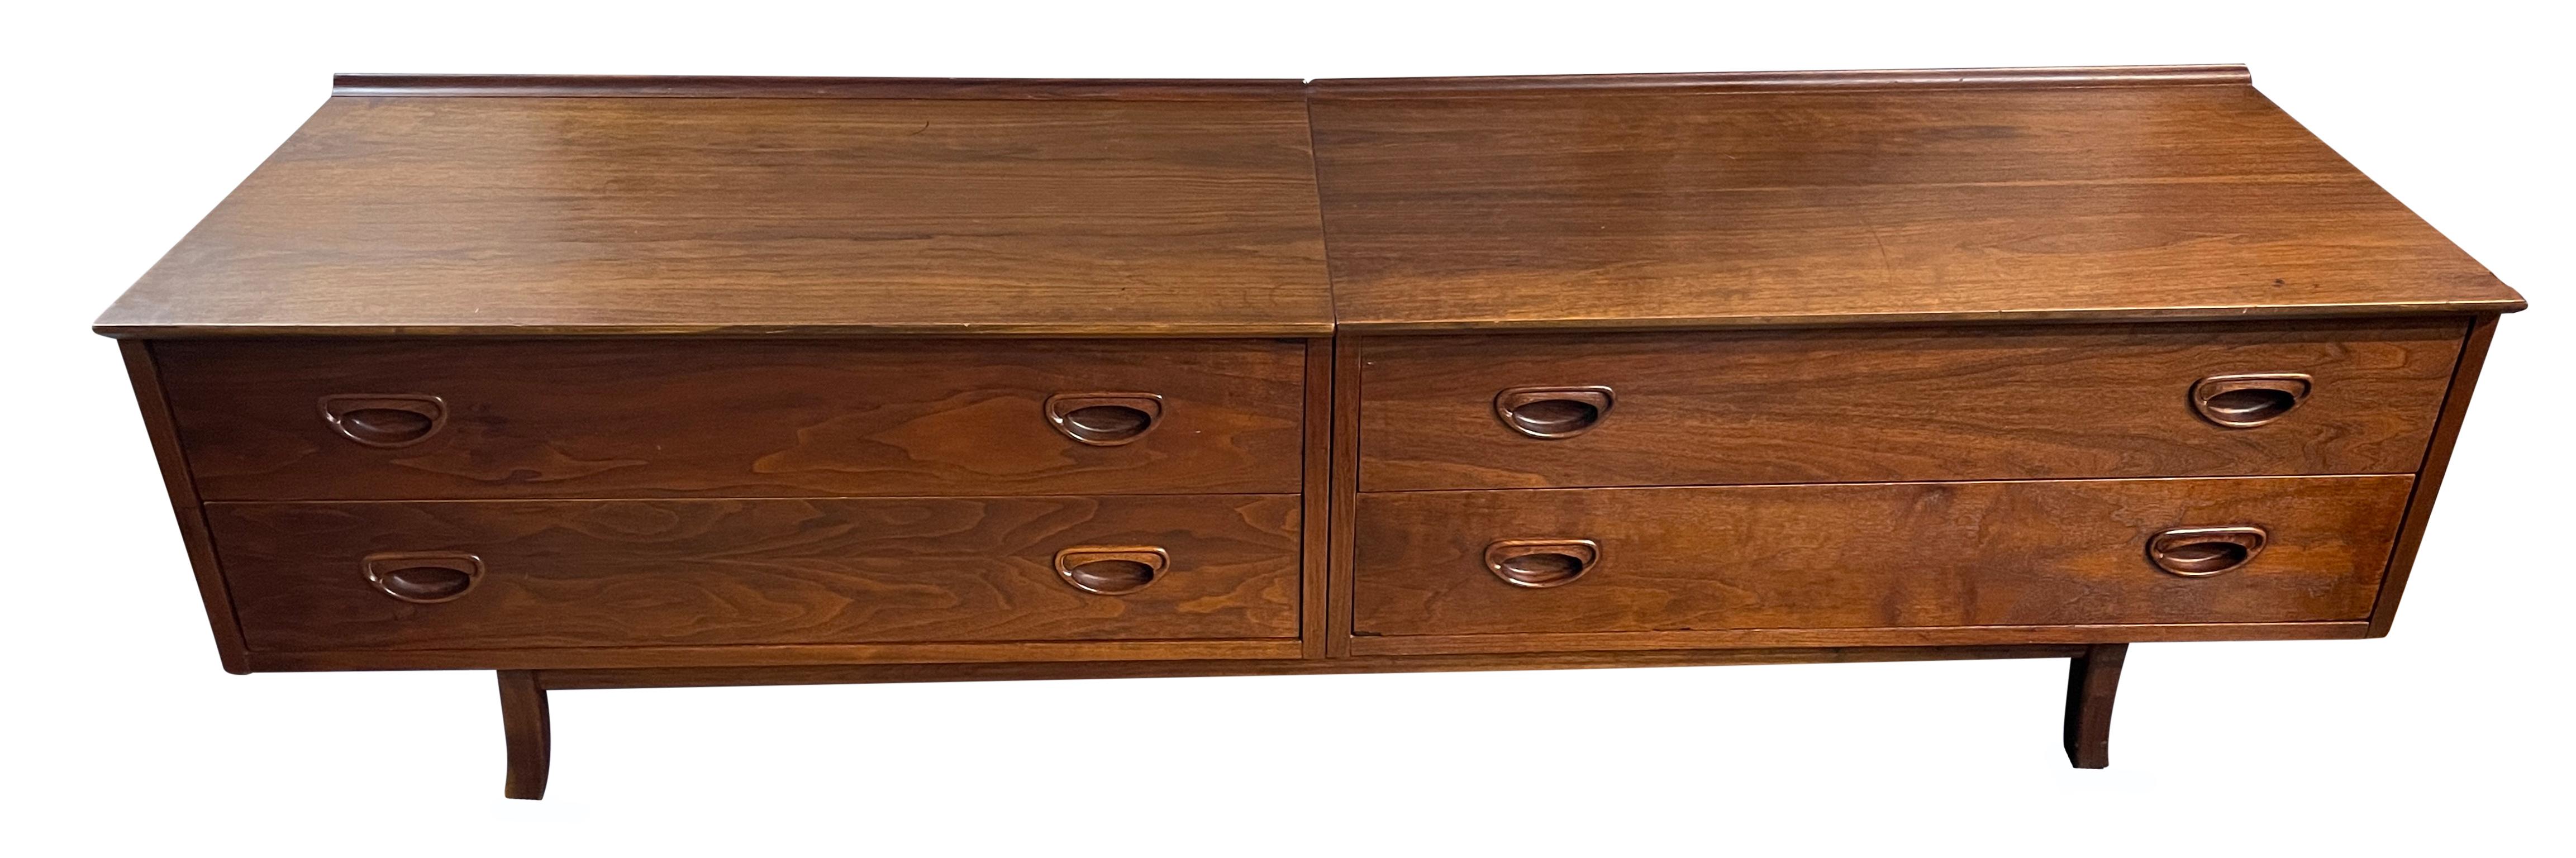 Founders mid-century walnut low 4-drawer dresser credenza carved handles. Very good construction and solid wood drawers. Solid curved wood legs. Has back lip on top surface. Great design and good vintage condition - clean inside and out. Shows